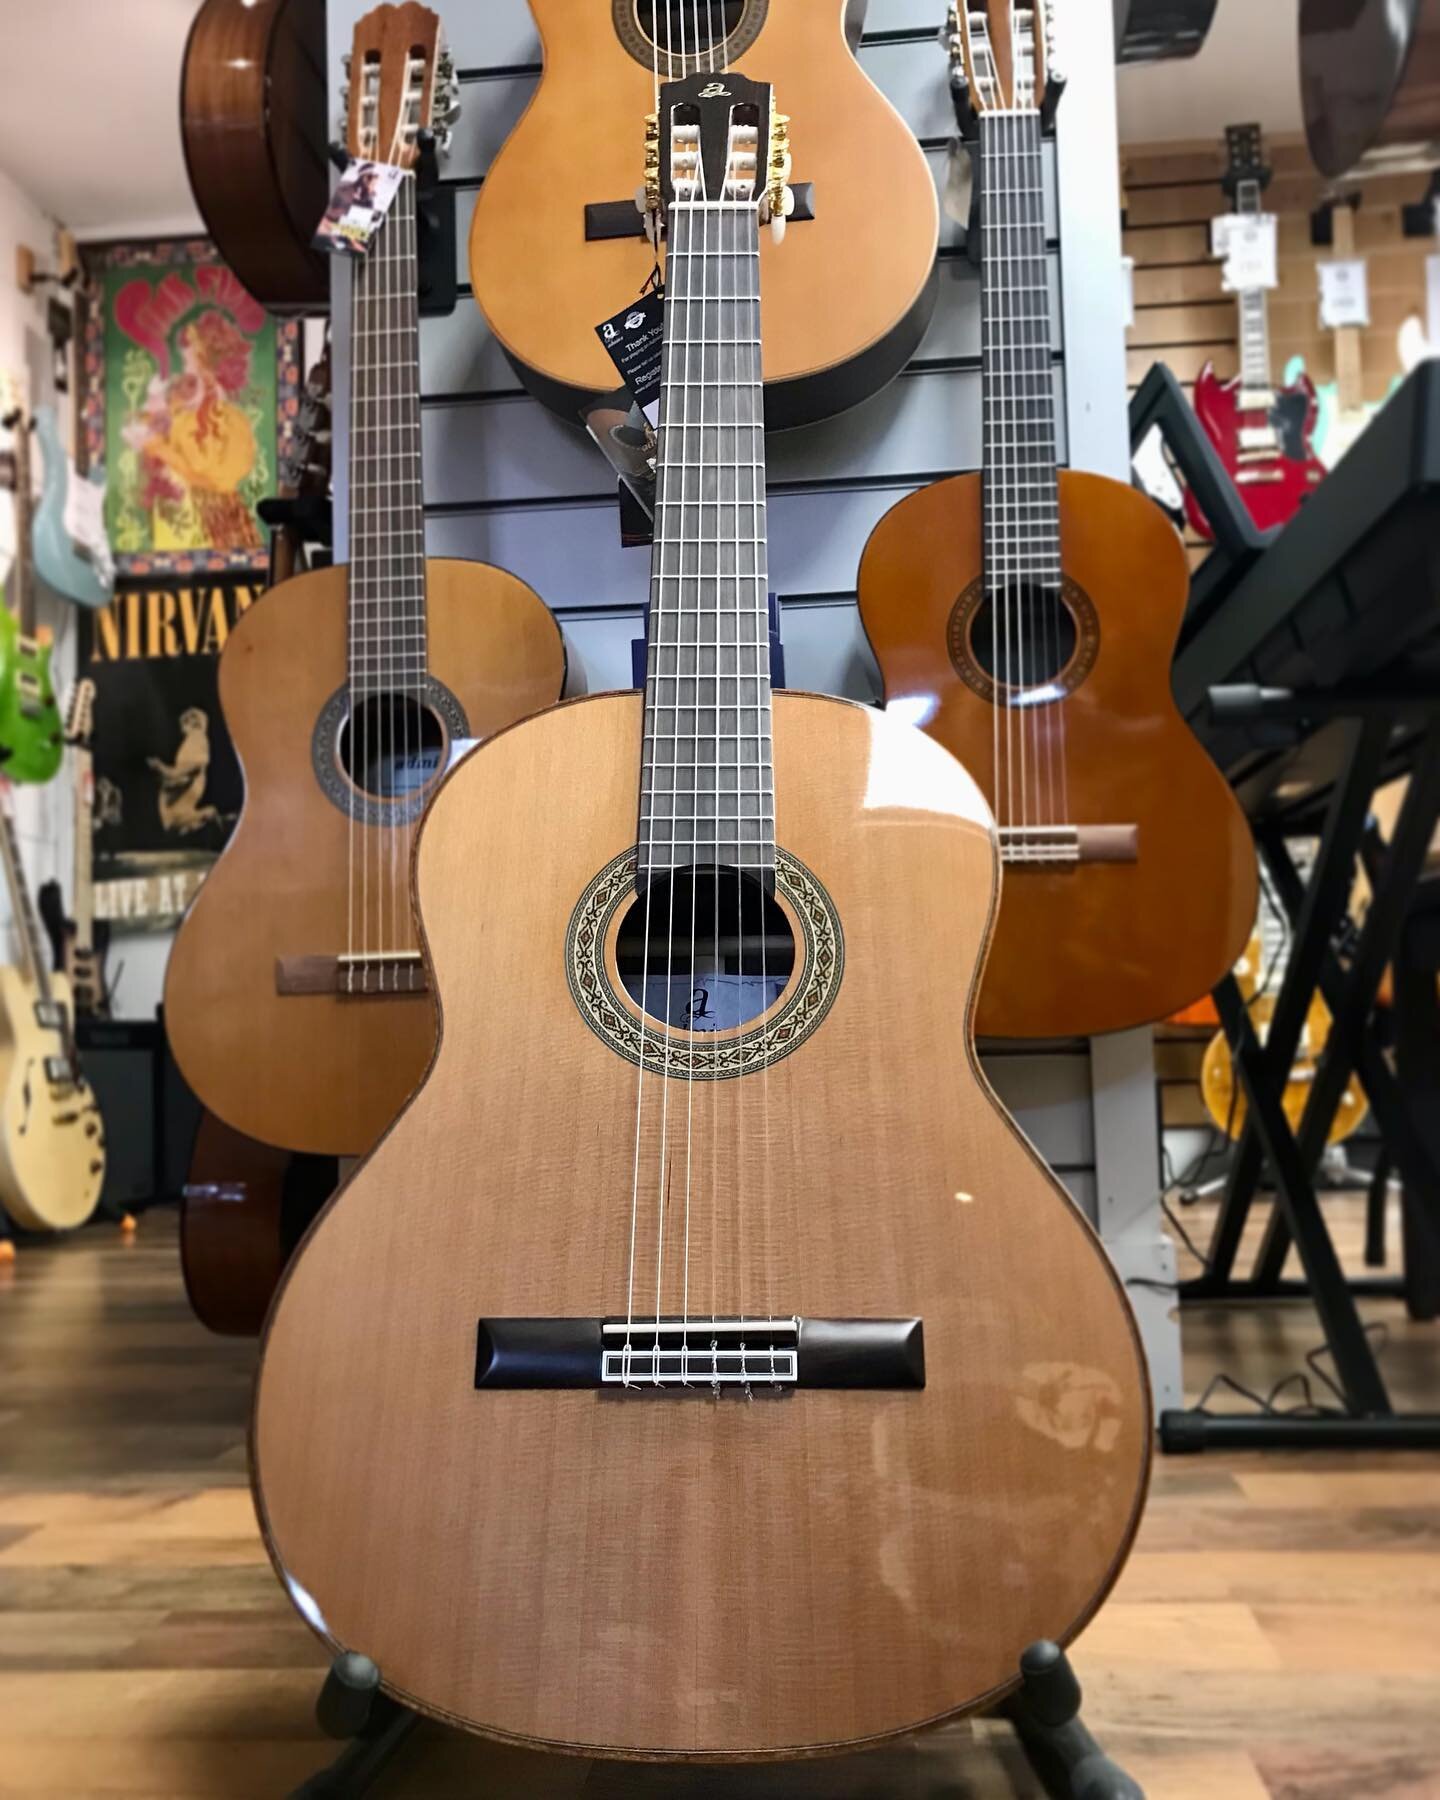 Something a little different for your eyes today.
This beautiful handcrafted @admiraguitars A10 is one of the nicest sounding classical guitars we&rsquo;ve heard! It&rsquo;s Solid Cedar top projects huuuge tones! 🌳